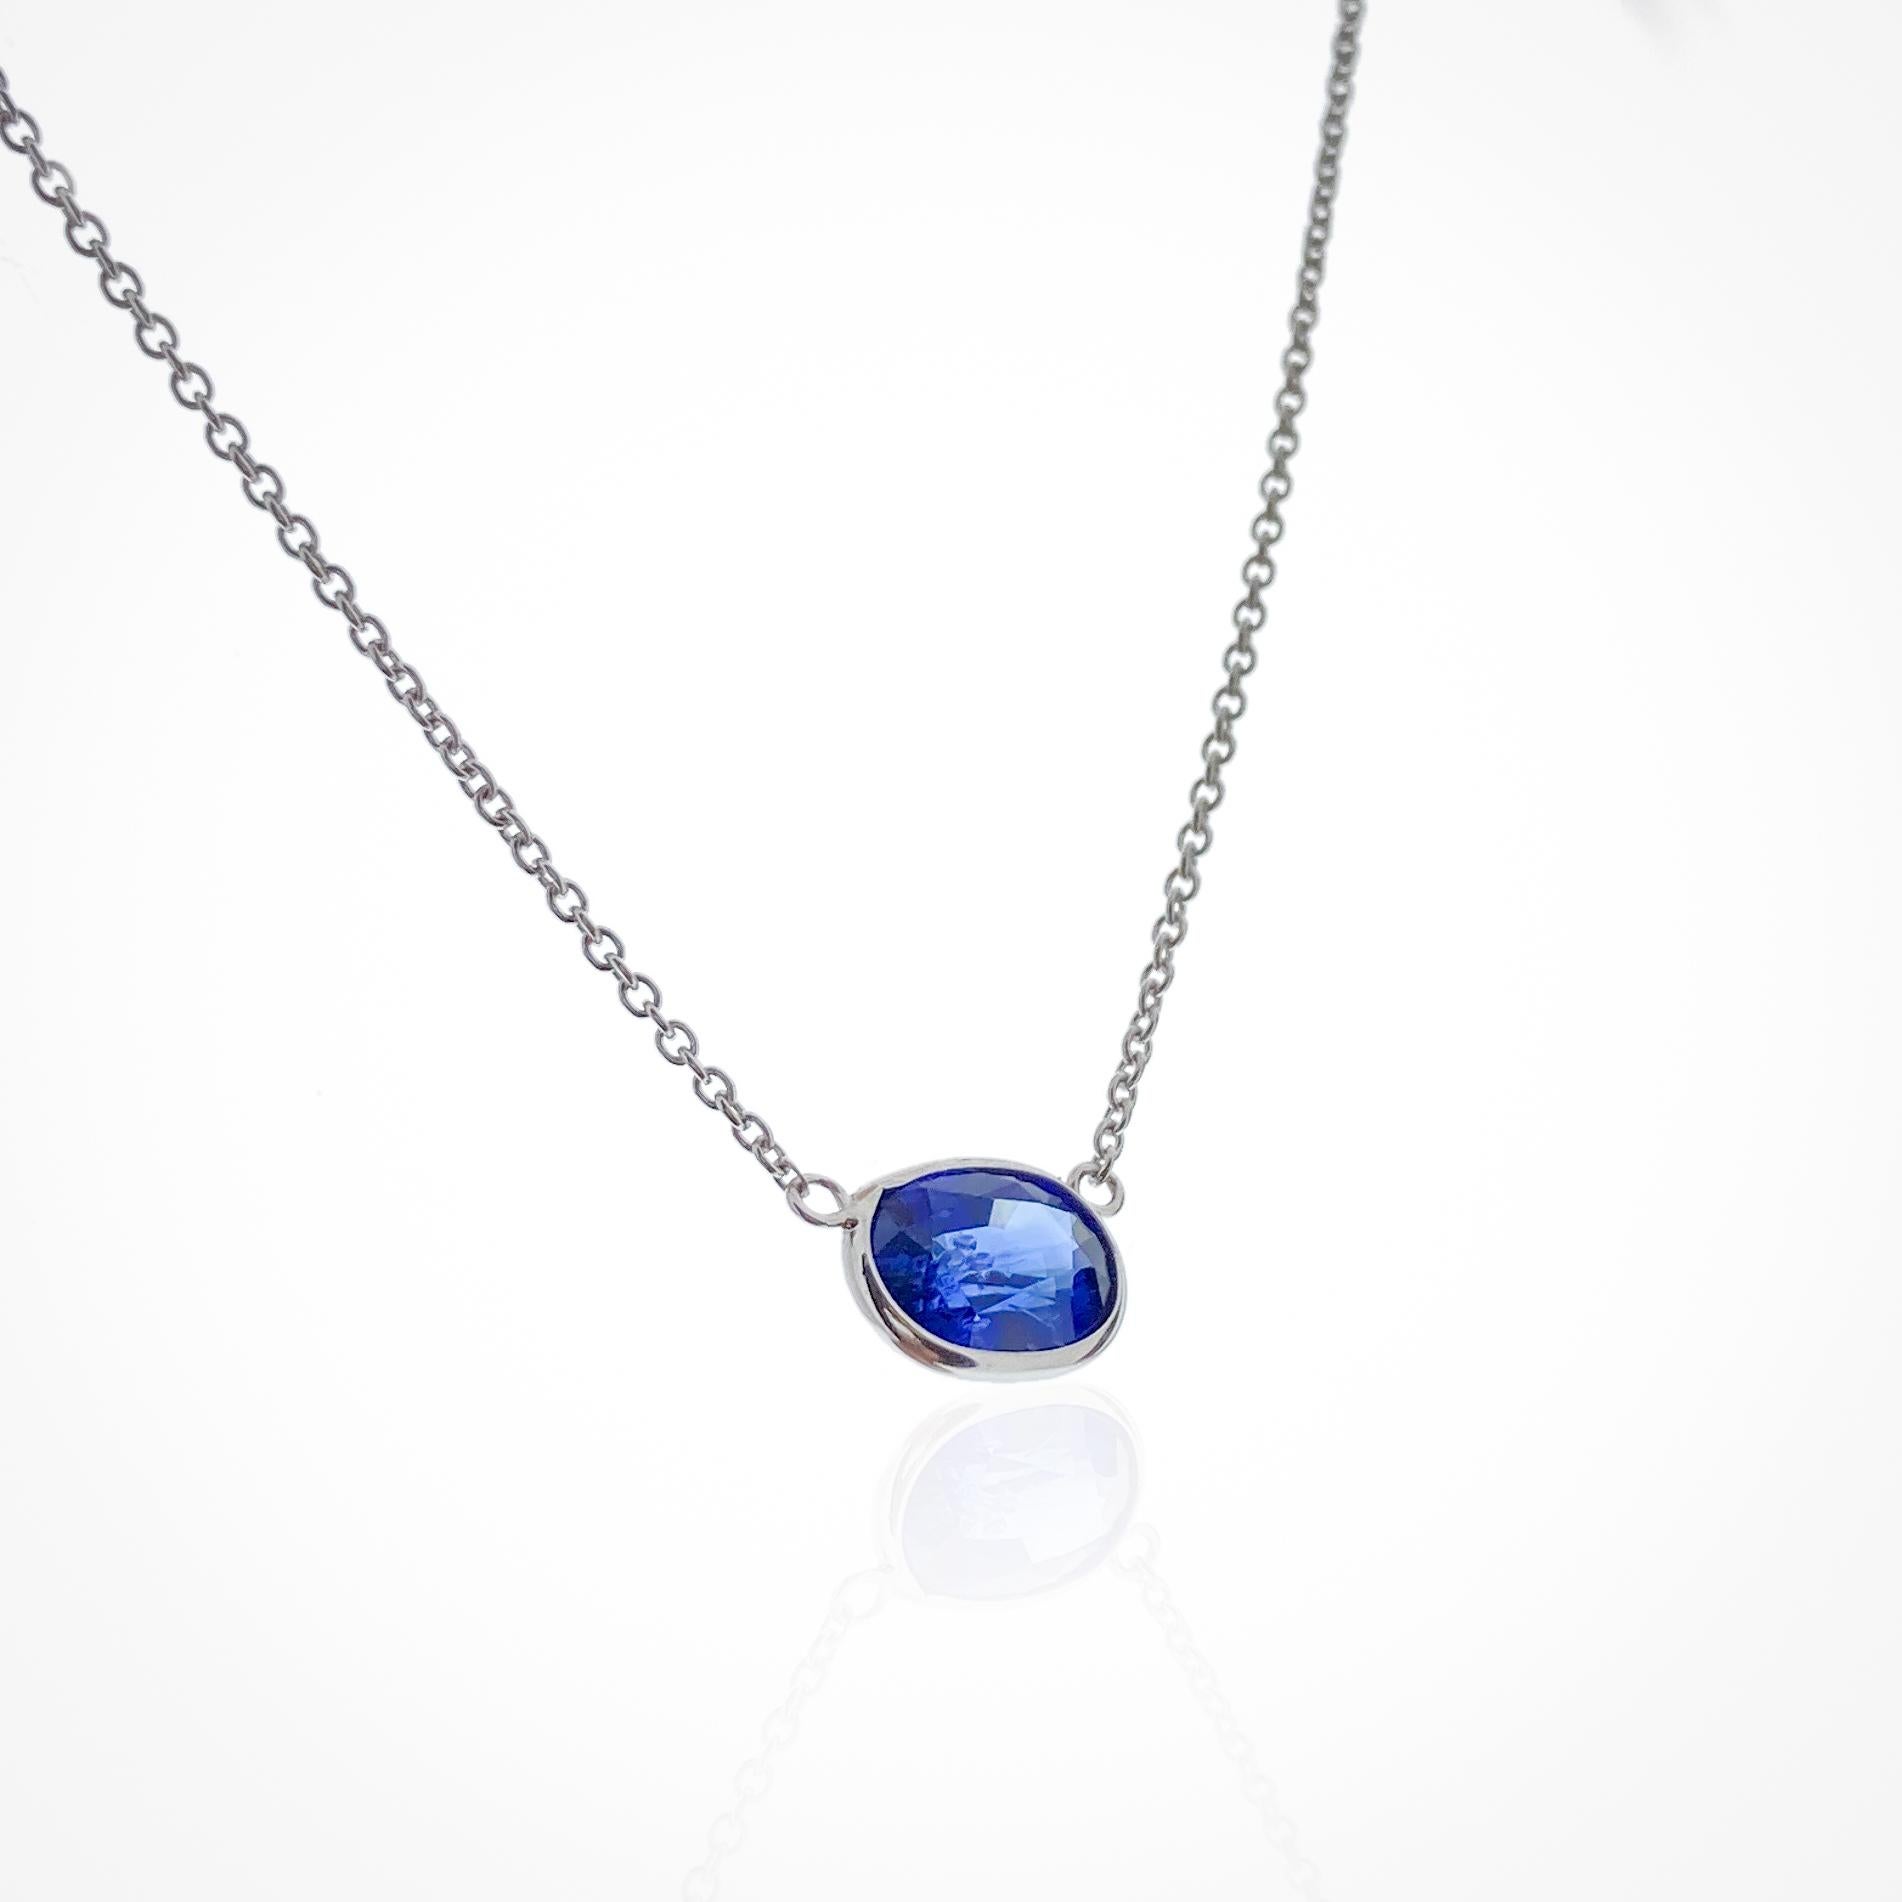 Contemporary 2.29 Carat Blue Oval Sapphire Fashion Necklaces In 14K White Gold  For Sale